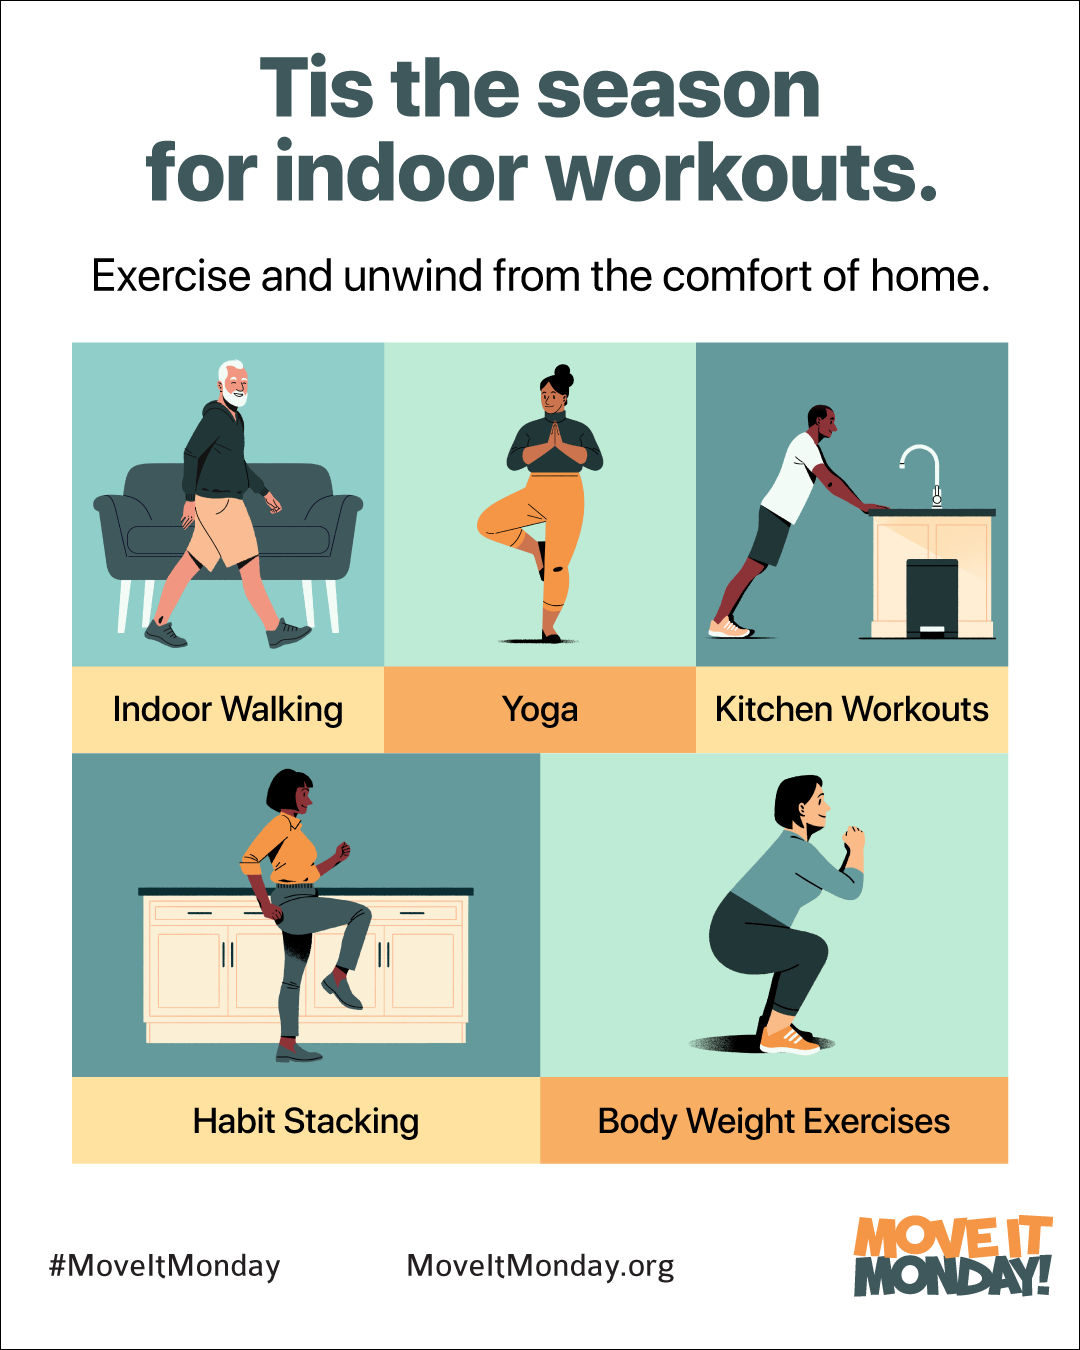 5 Easy Ways to Take Your Move It Monday Exercises Indoors